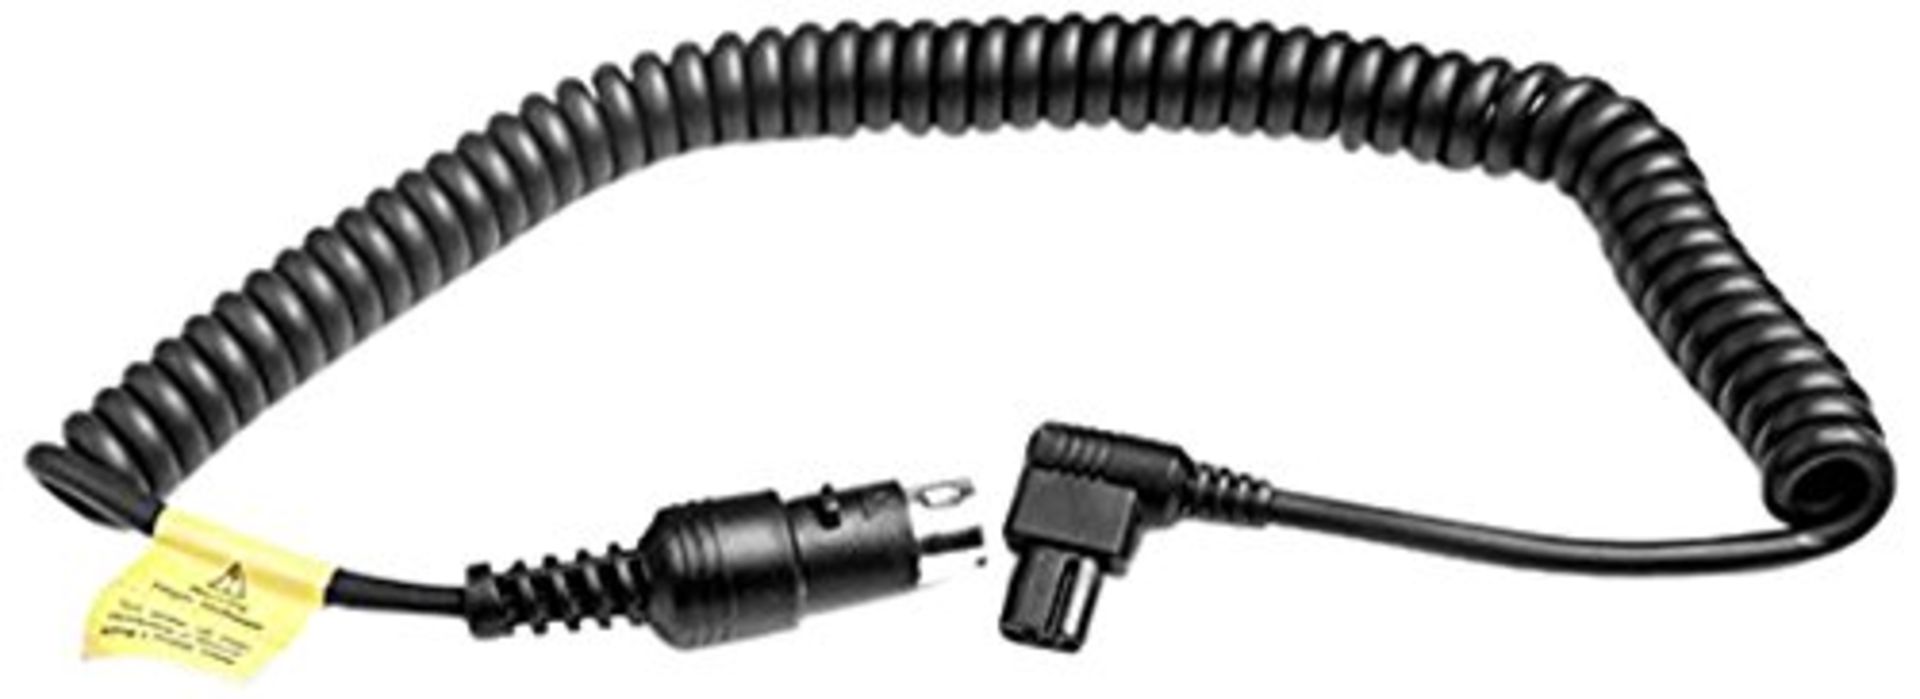 Propac Sx Cable for Camera